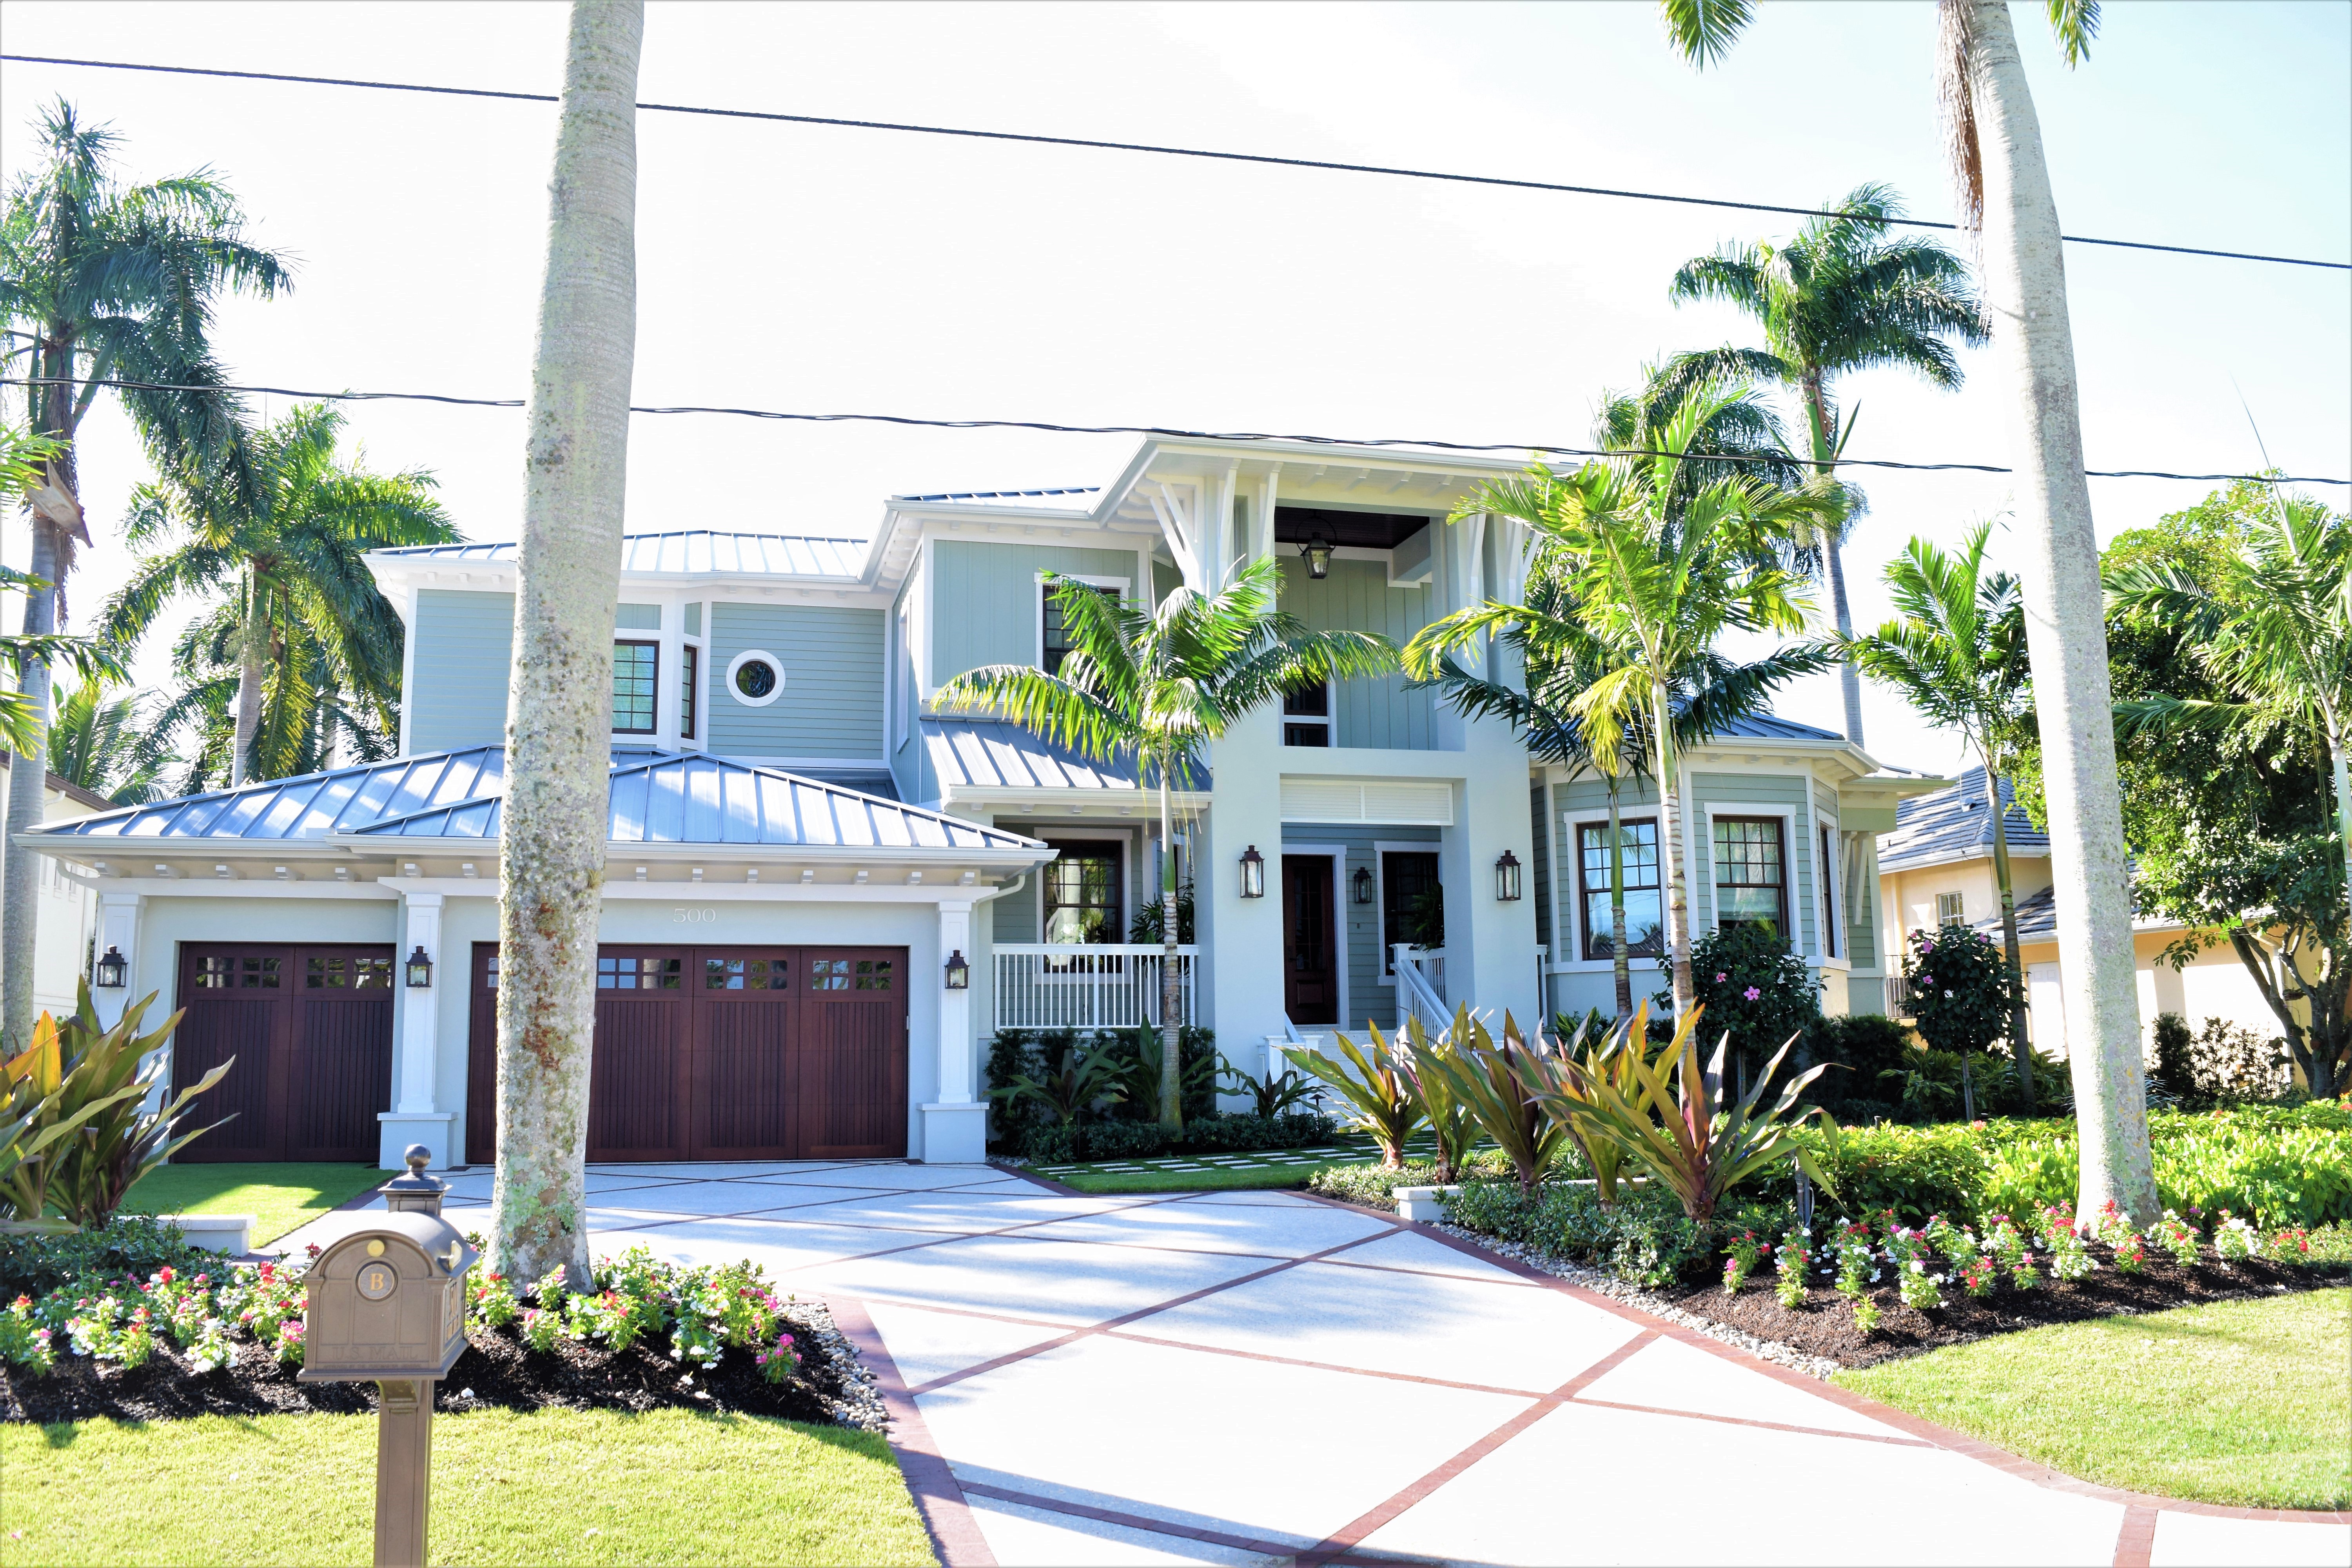 Residential Property Management in and near Bonita Beach Florida